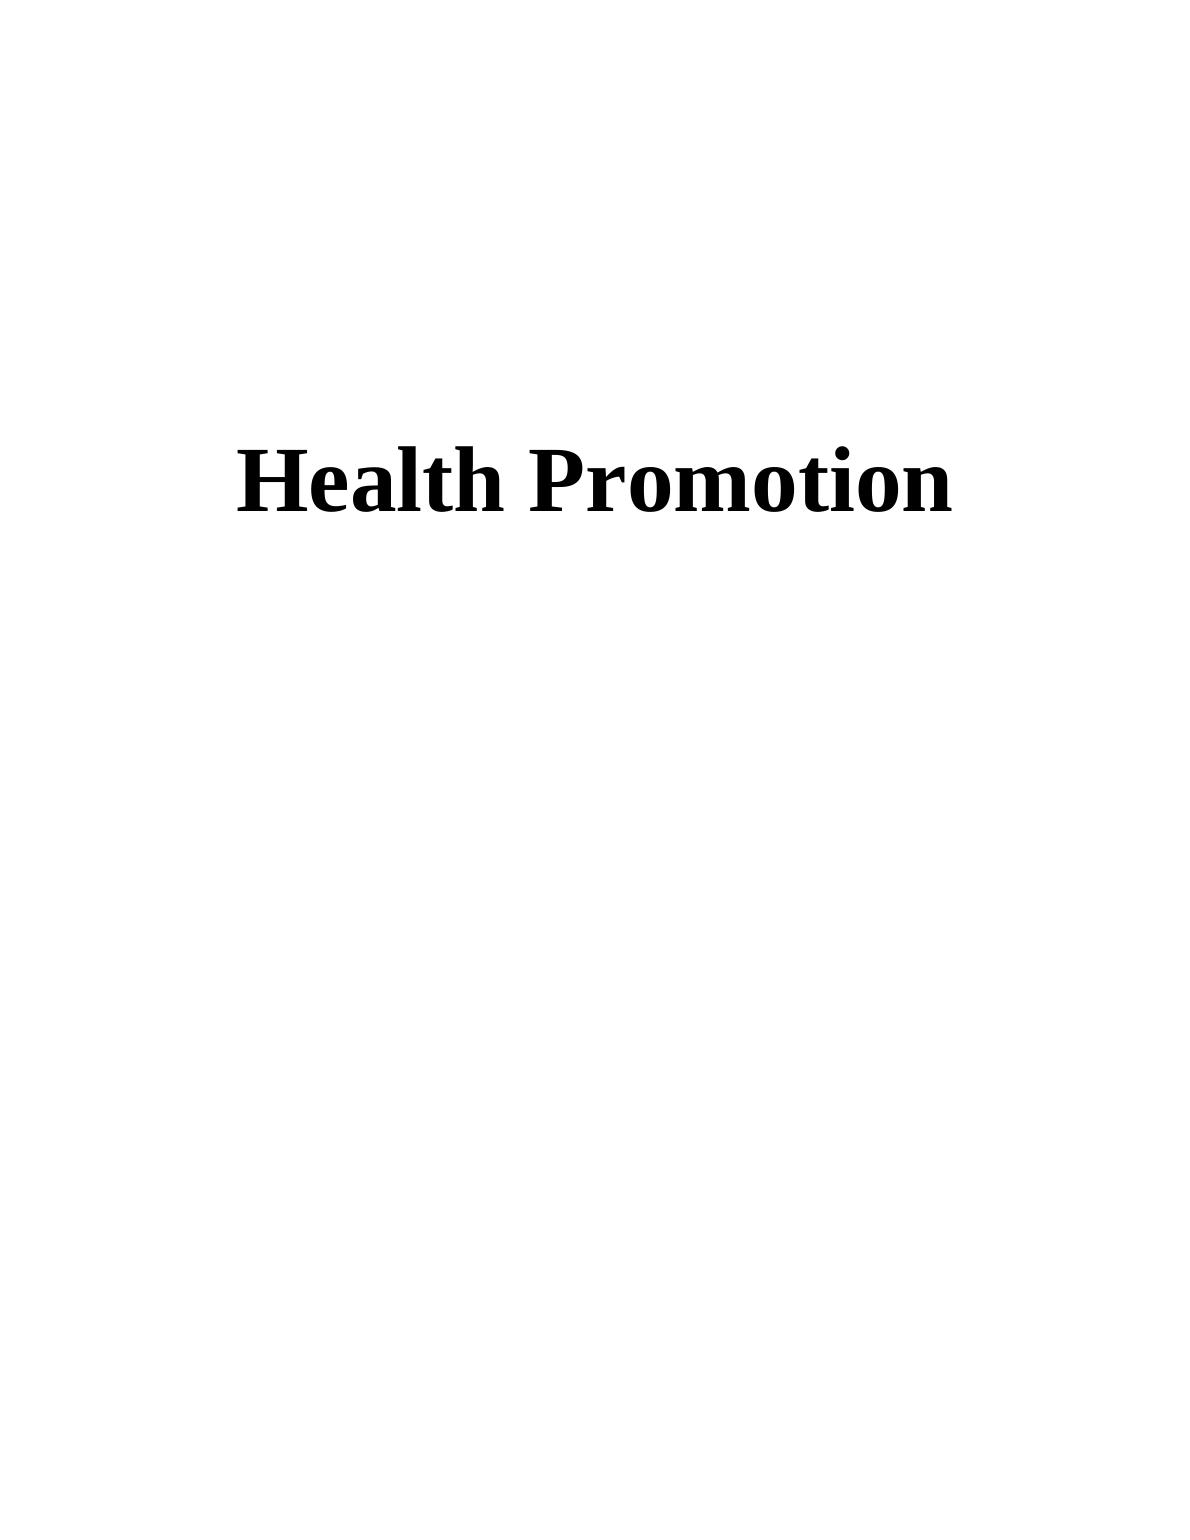 Health Promotion Assignment Solution_1